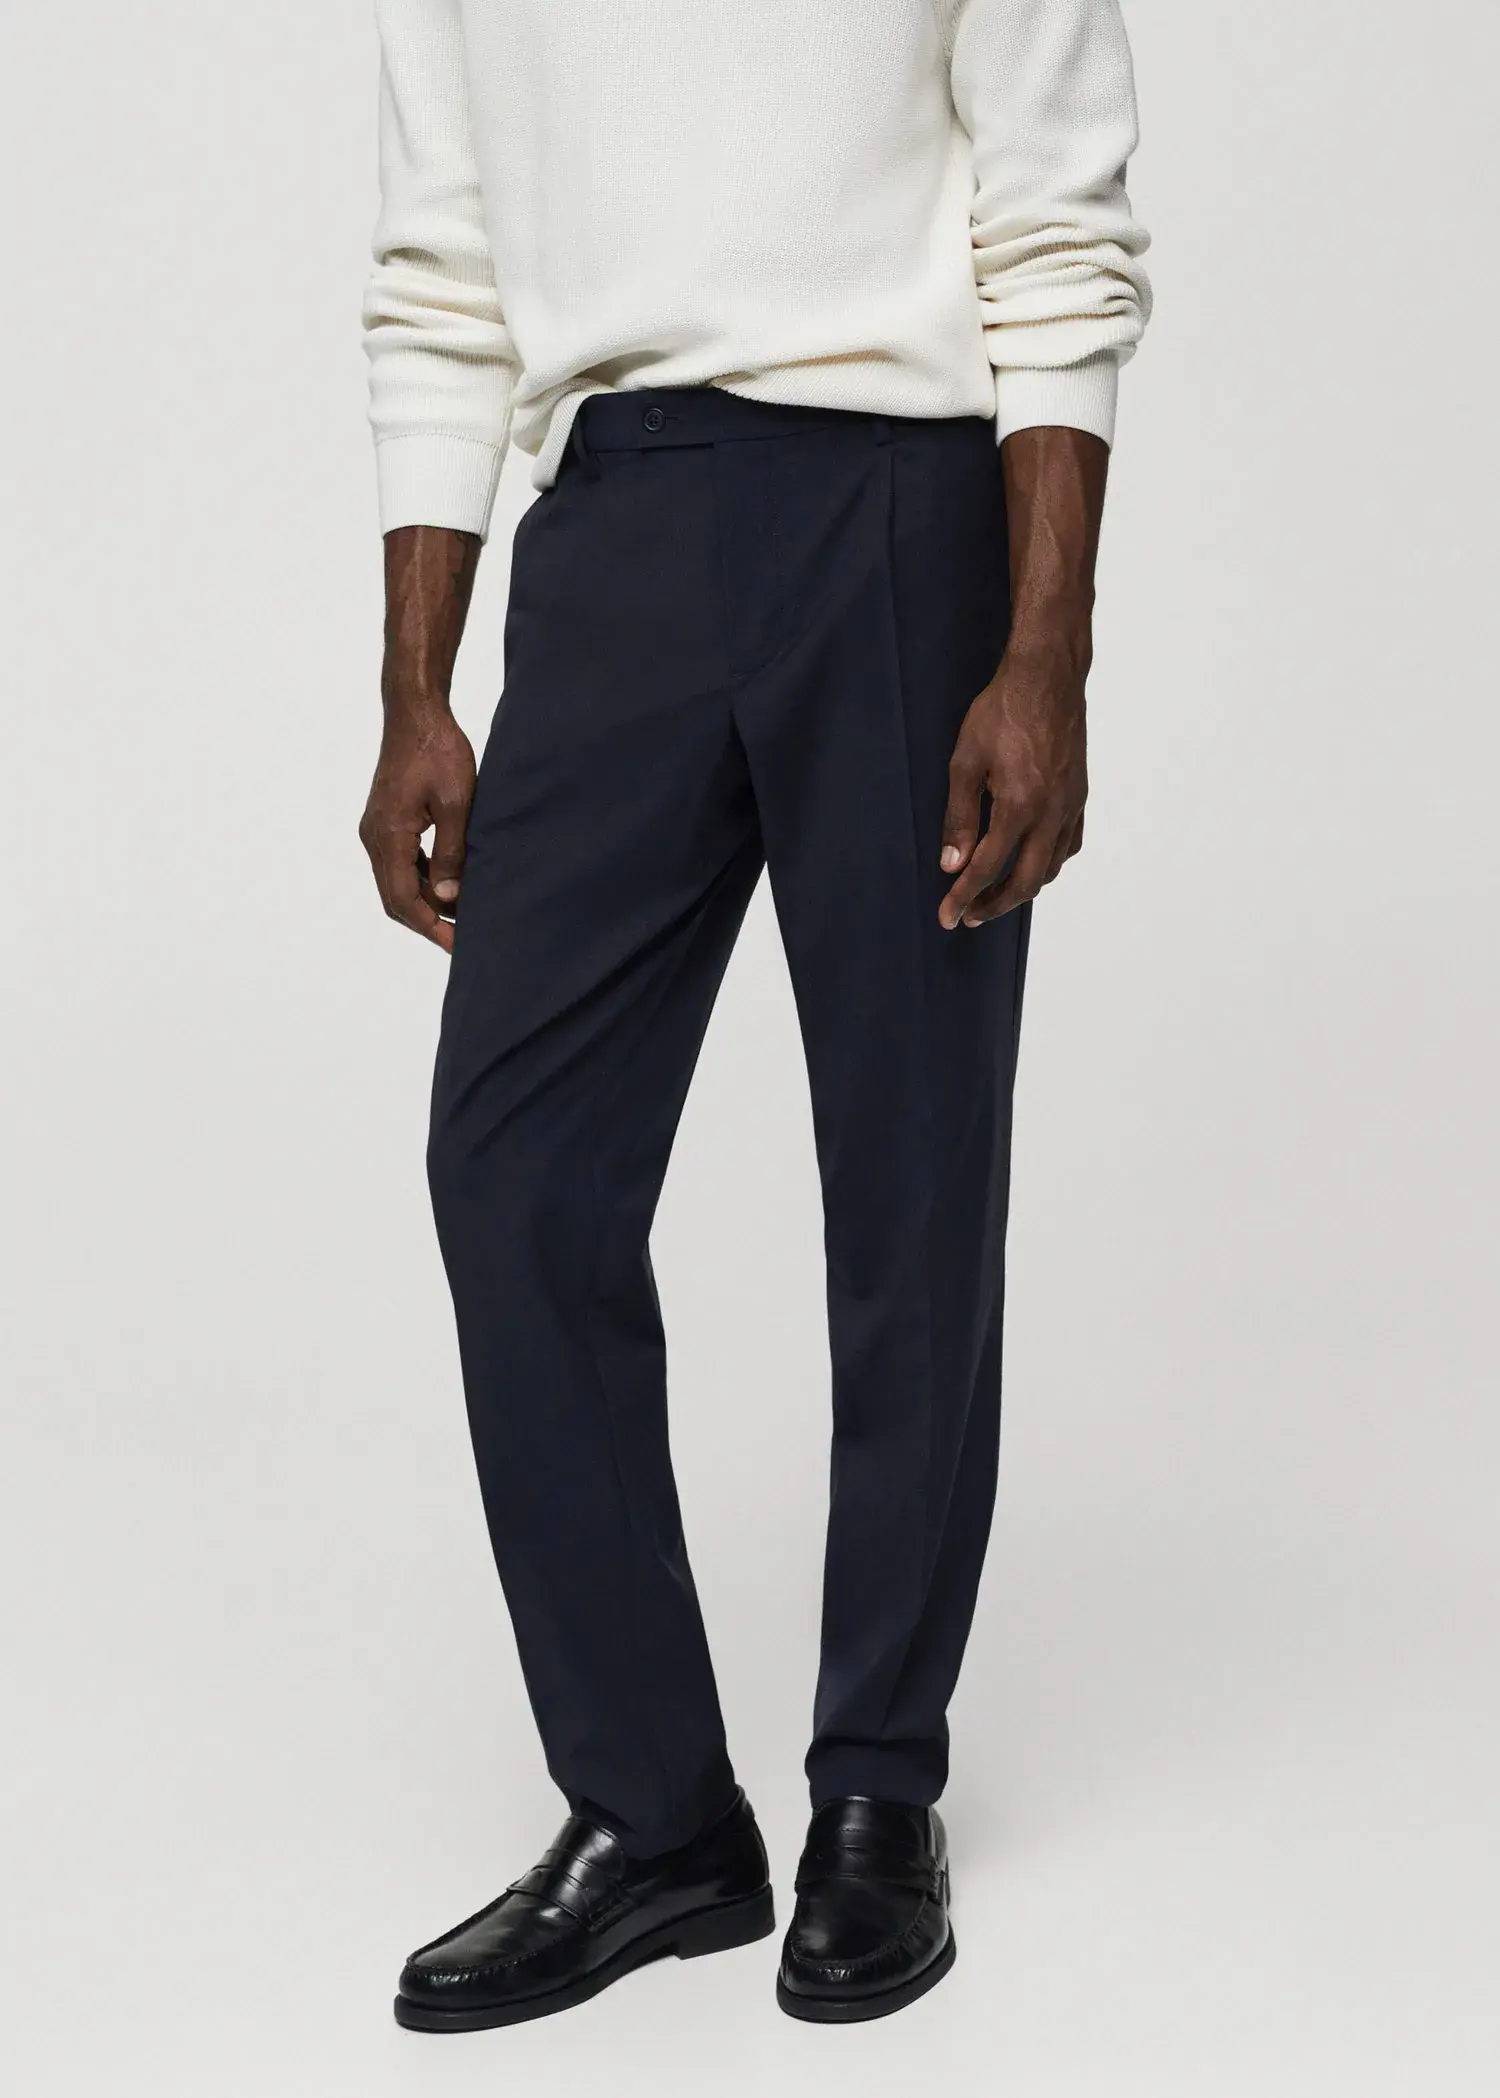 Mango Cold wool trousers with pleat detail. 2